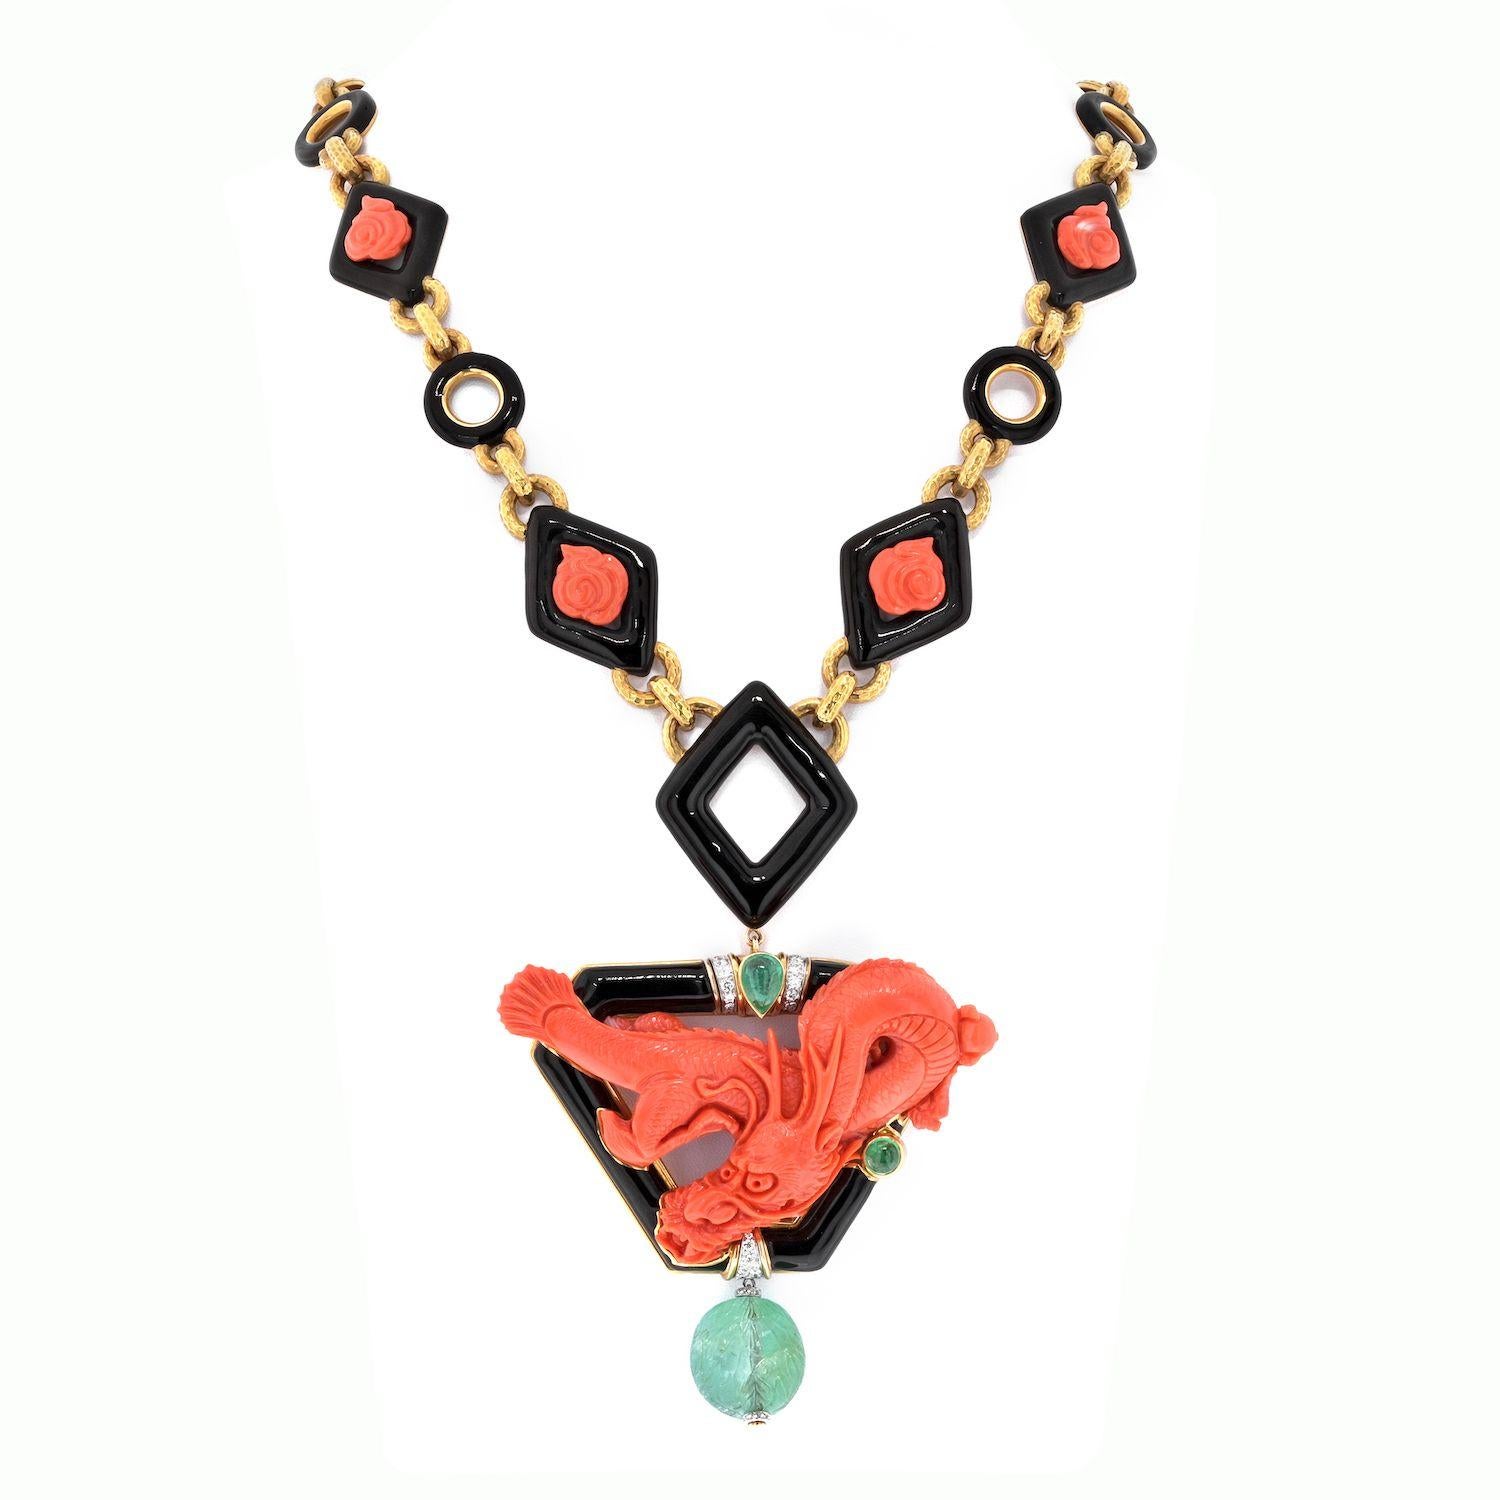 David Webb Platinum & 18K Yellow Gold Coral Dragon Carved Green Emerald Necklace. This is an exceptional coral link style necklace depicting a fierce Dragon. Accented with a large green emerald suspended from a removable pendant. 36 inches long.